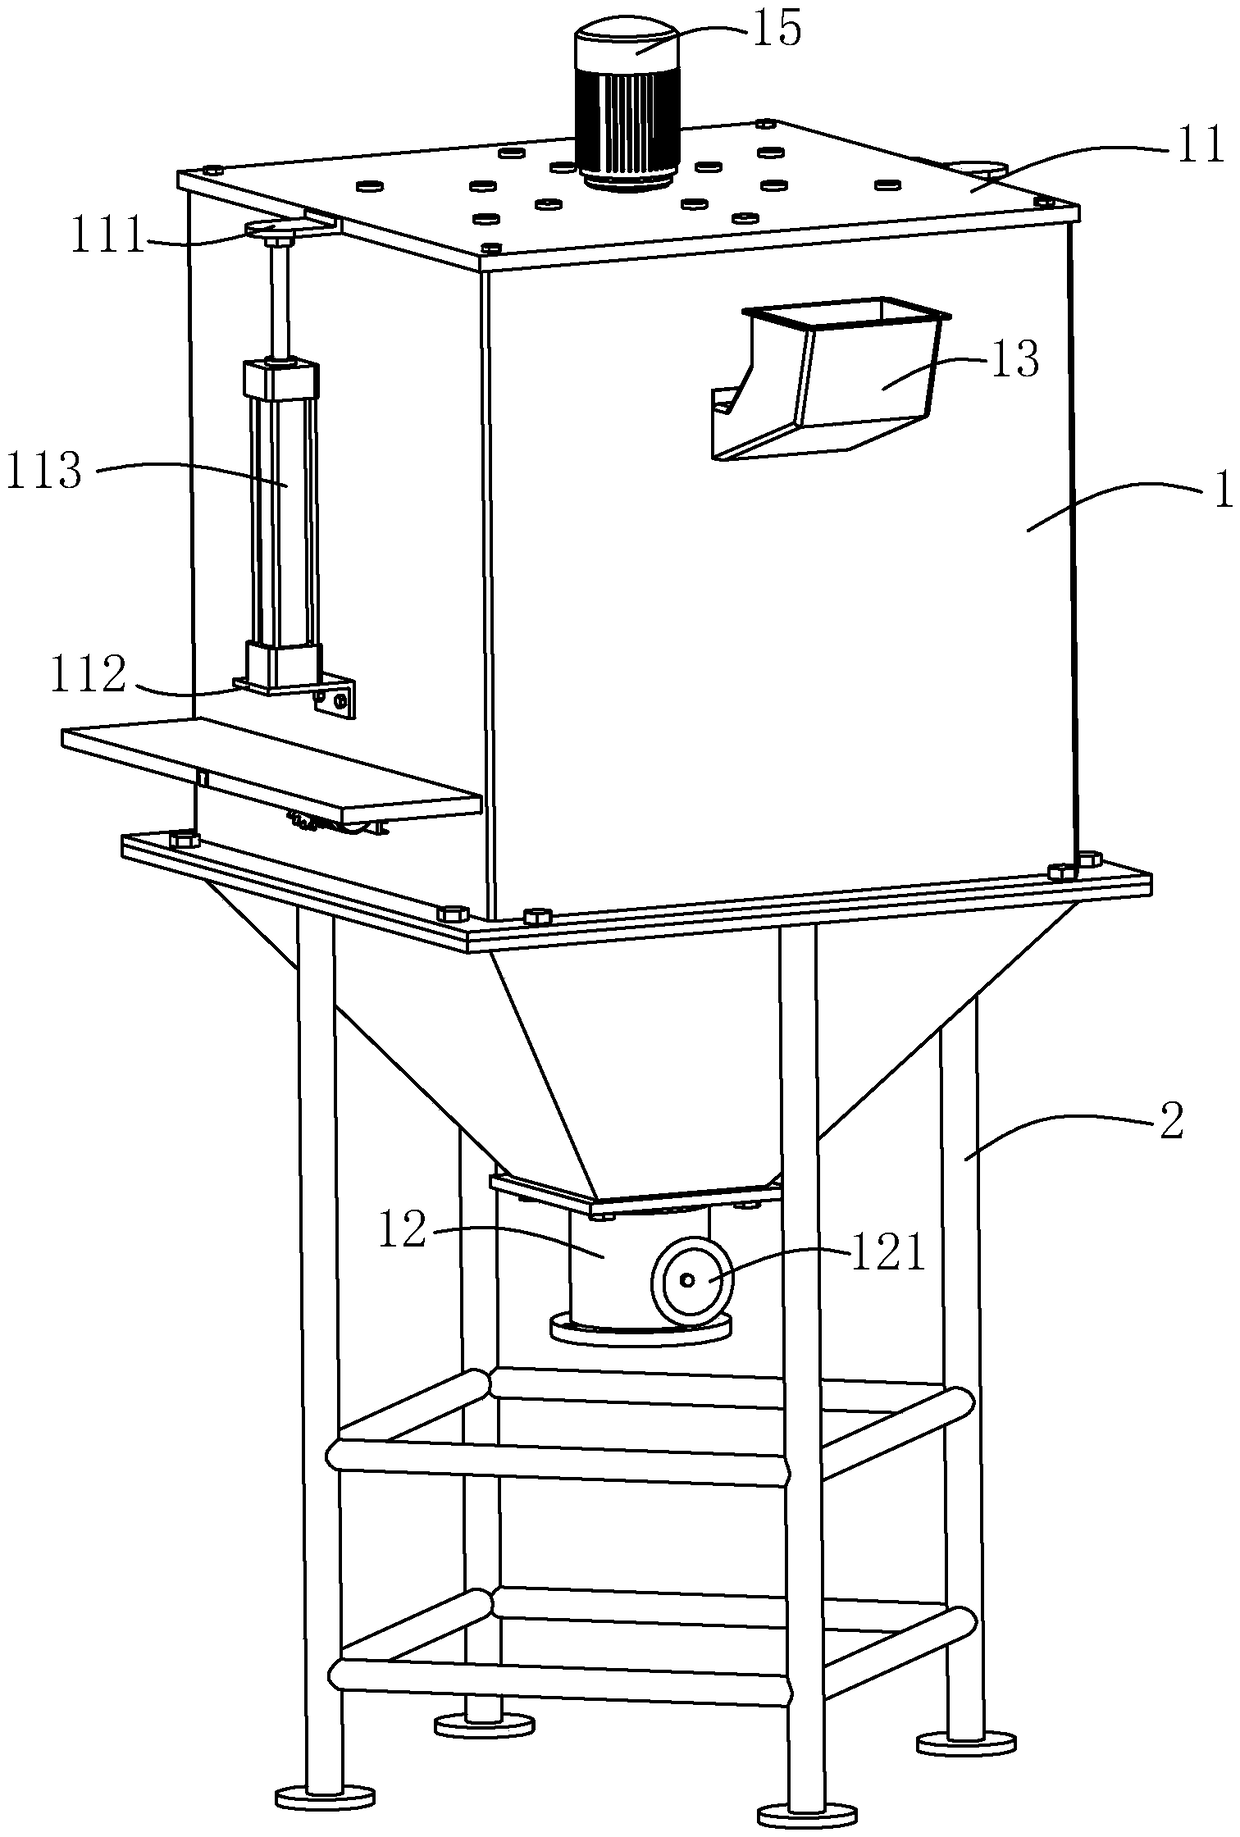 Construction garbage comprehensive treatment method and apparatus